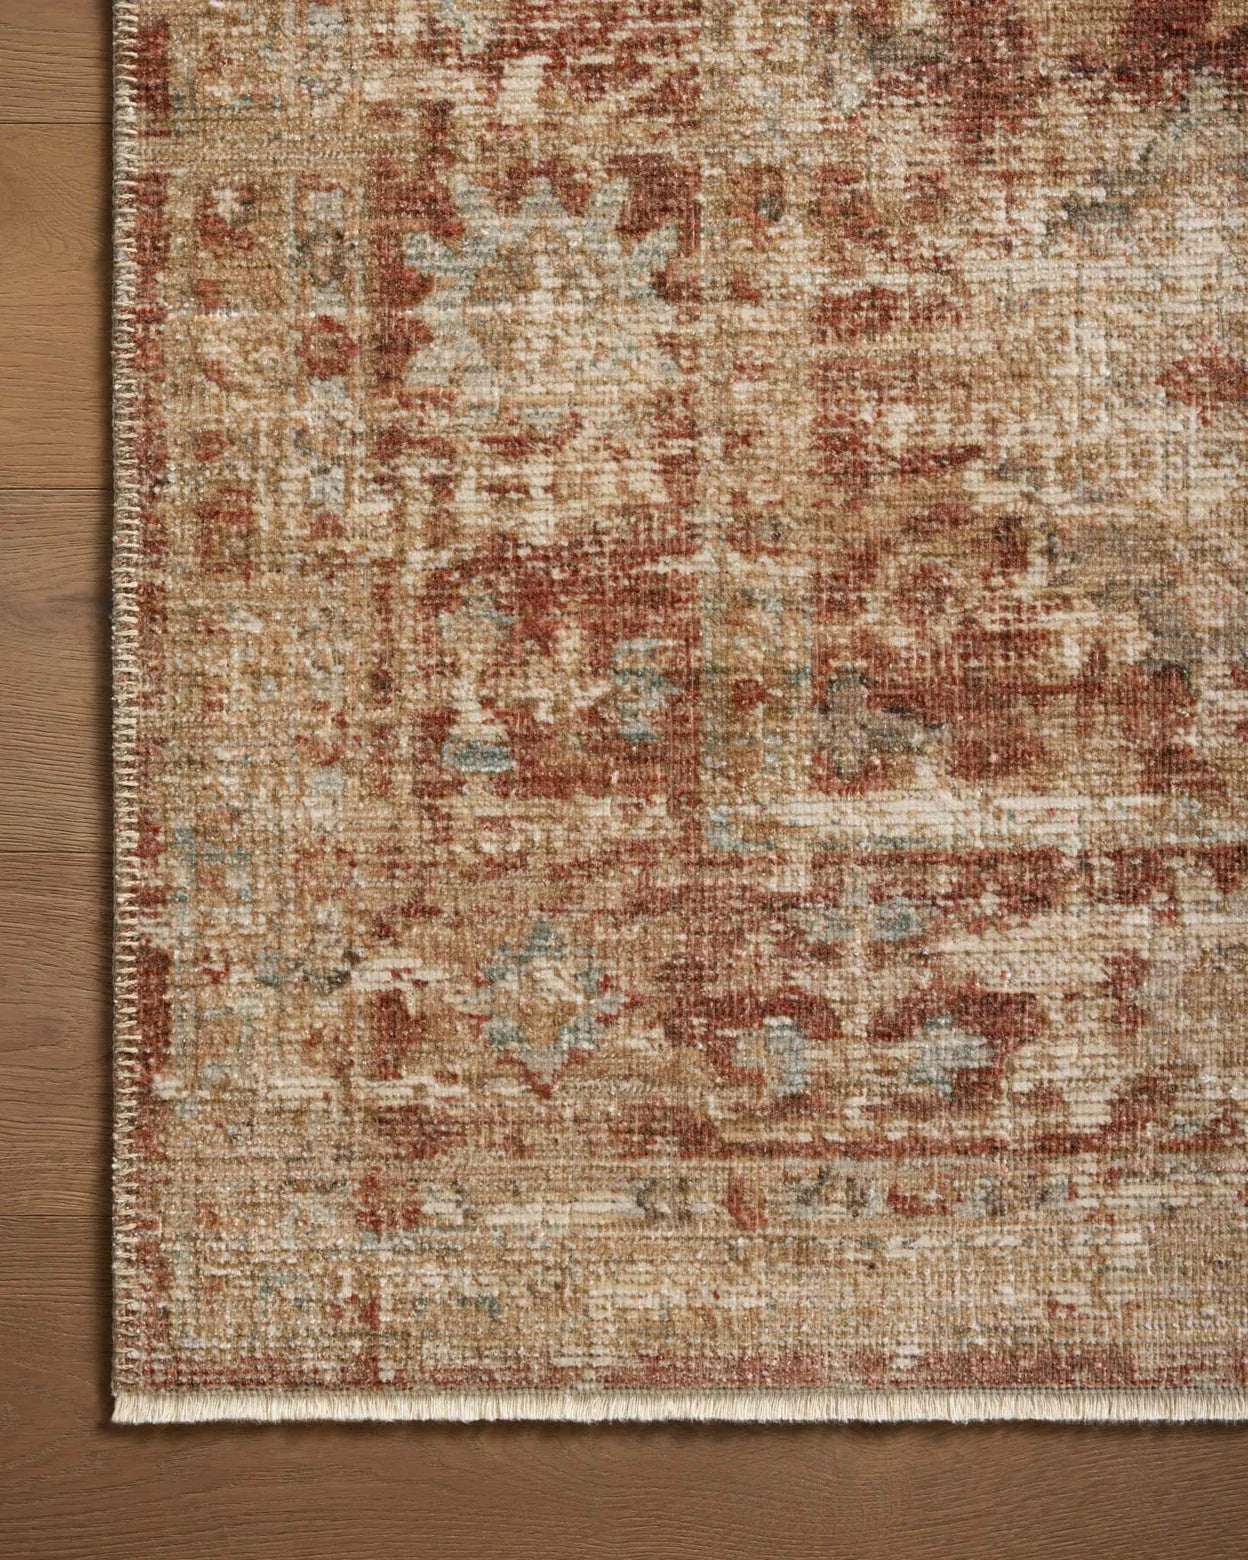 A detailed, ornate Loloi Rugs area rug with a Brick / Multi pattern featuring shades of brown, red, and beige, laid out on the wooden floor of a Scottsdale Arizona bungalow, partially covering it.